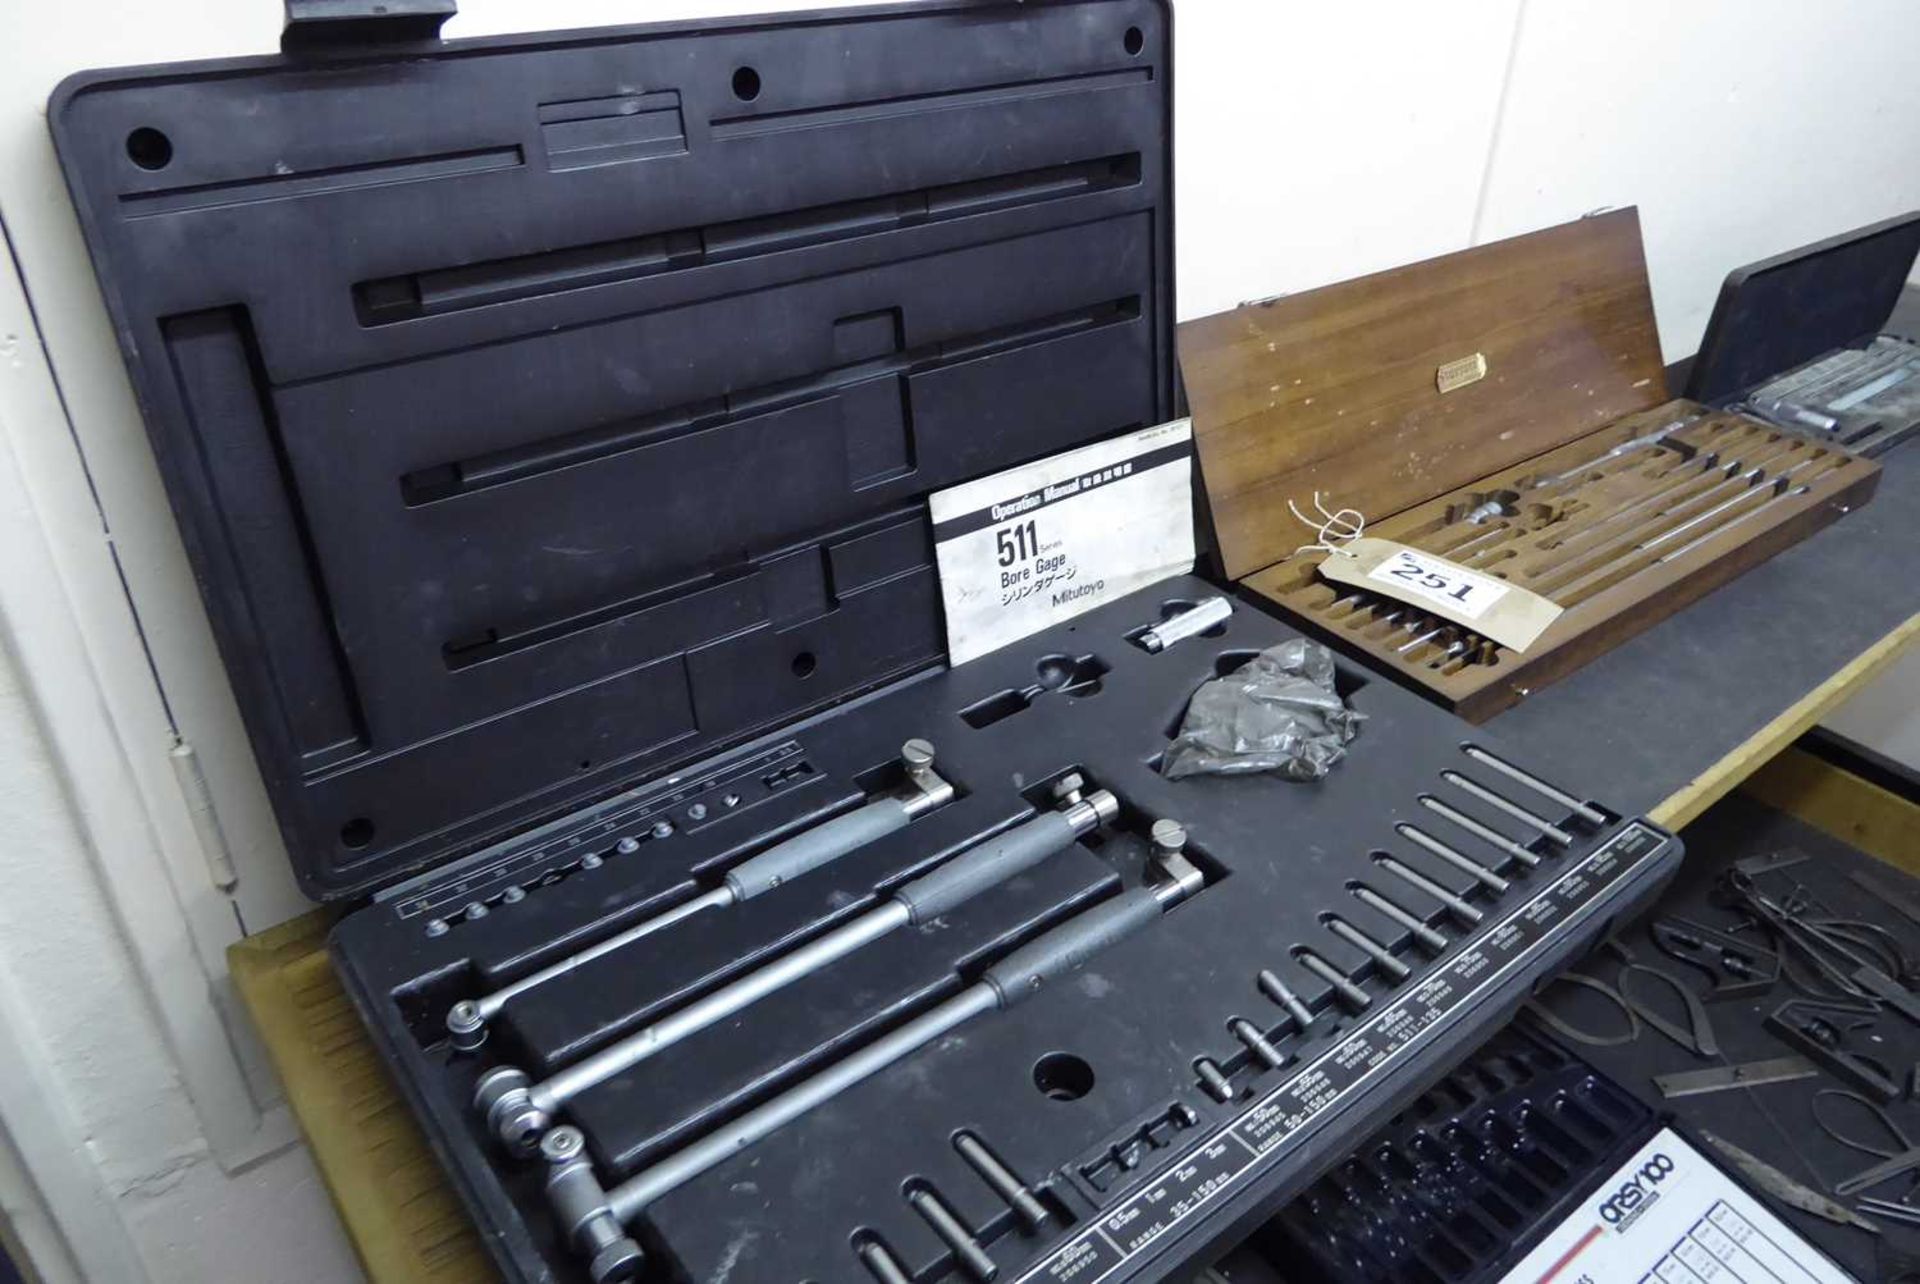 +VAT Mitutoya 511 series bore gauge set together with Starrett bore gauge and one other